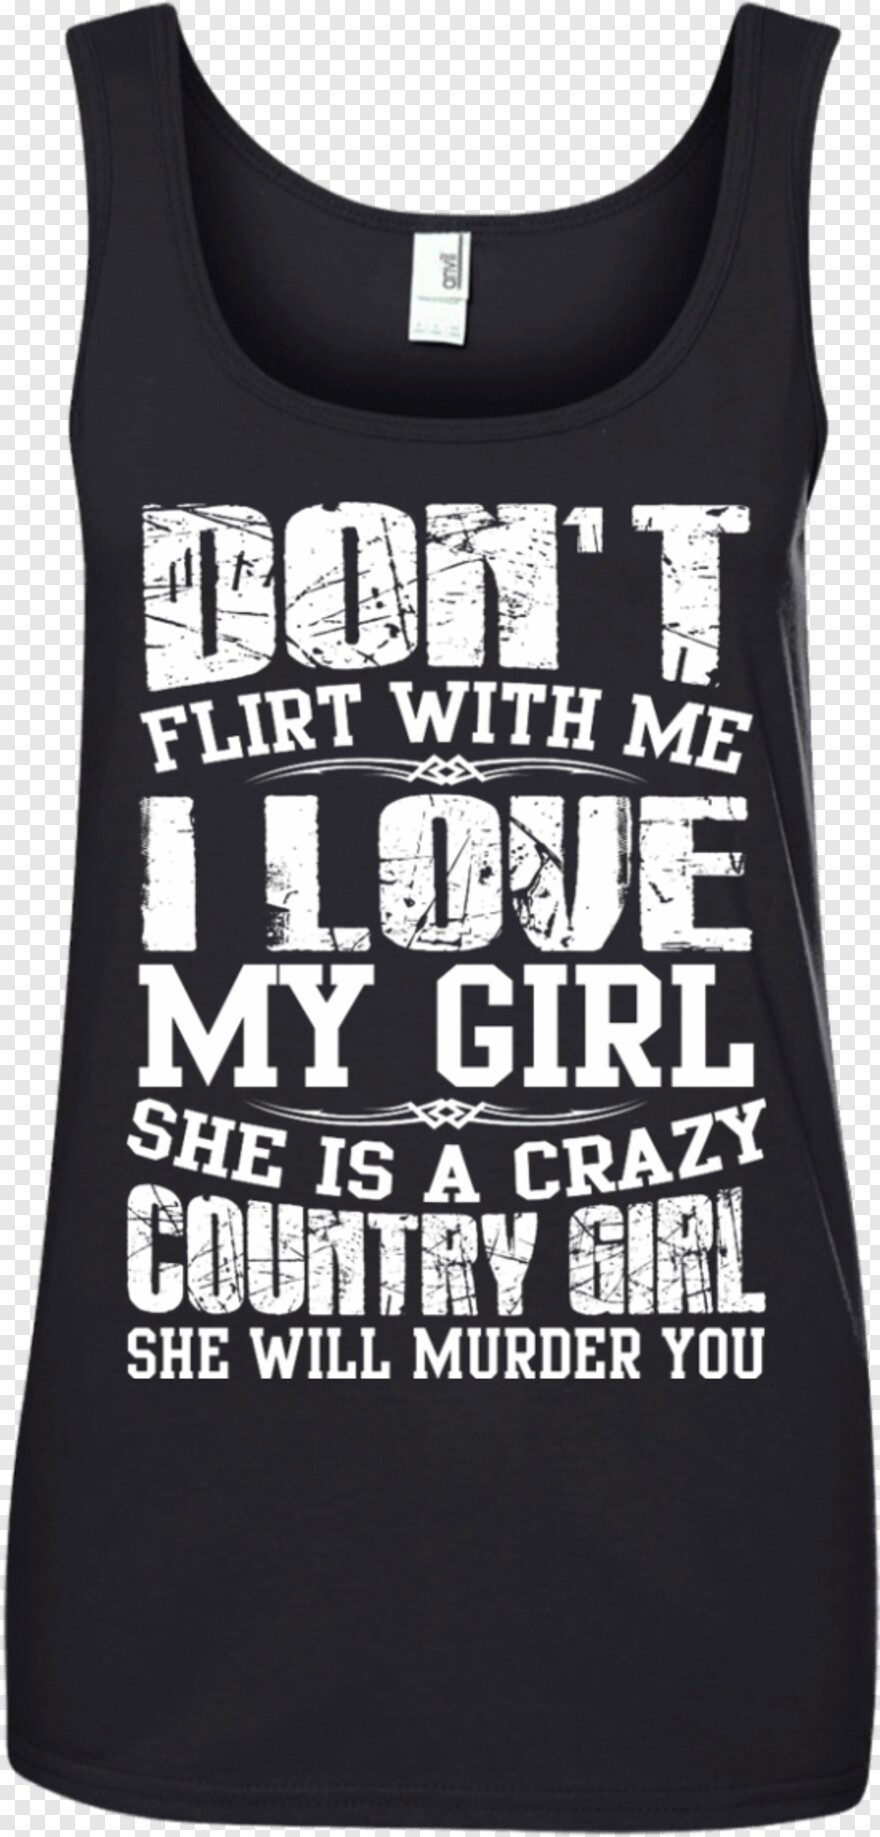 country-girl # 952422